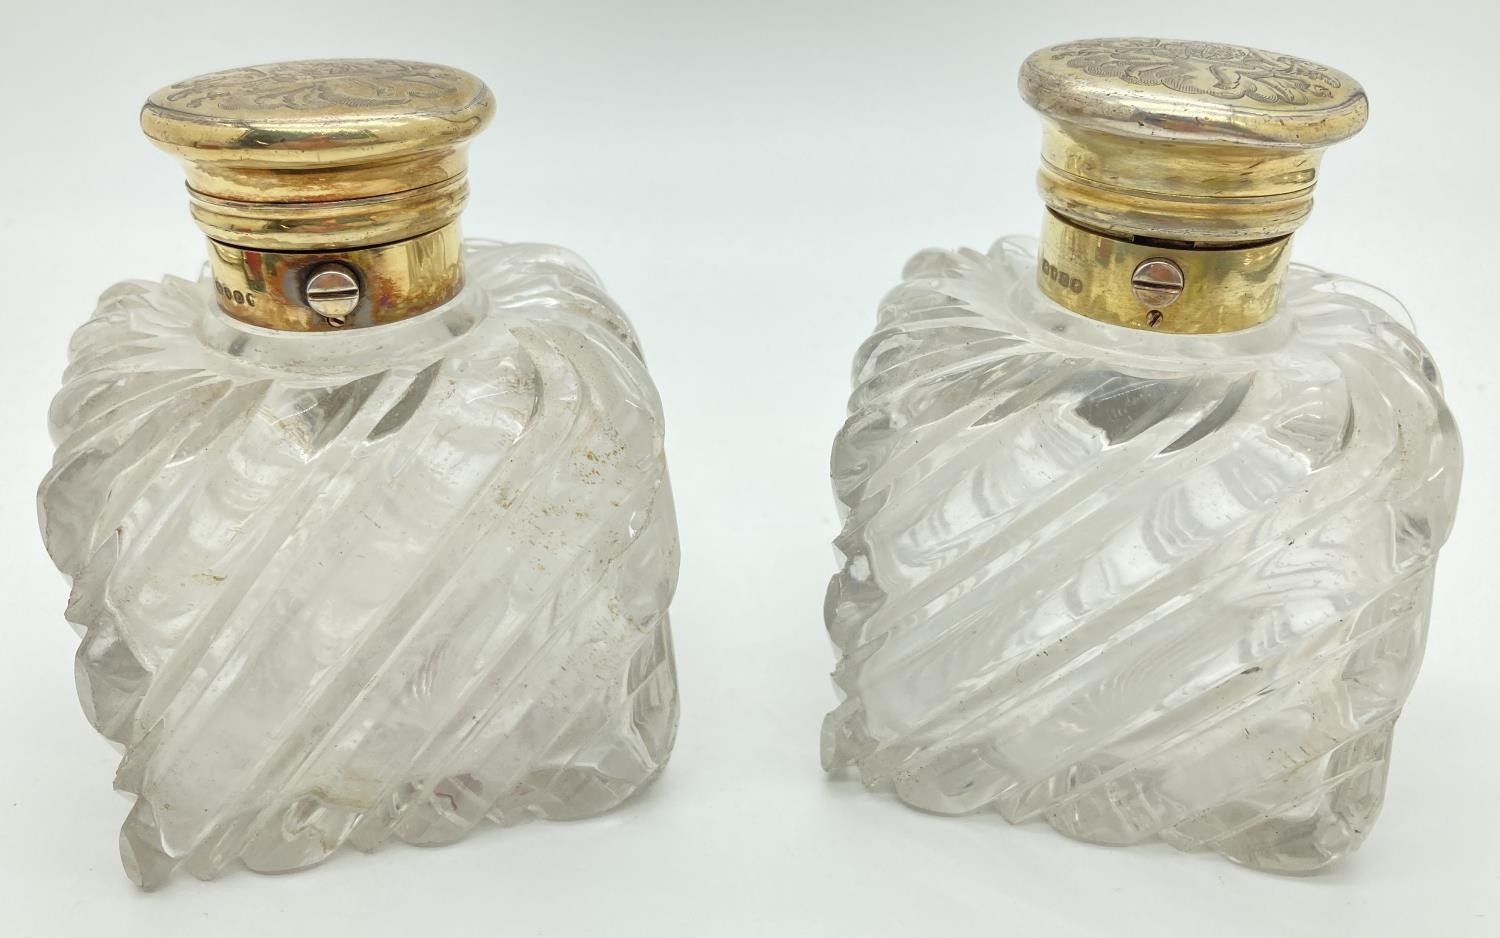 A pair of Victorian glass scent bottles with engraved silver gilt lids. Chunky square shaped glass